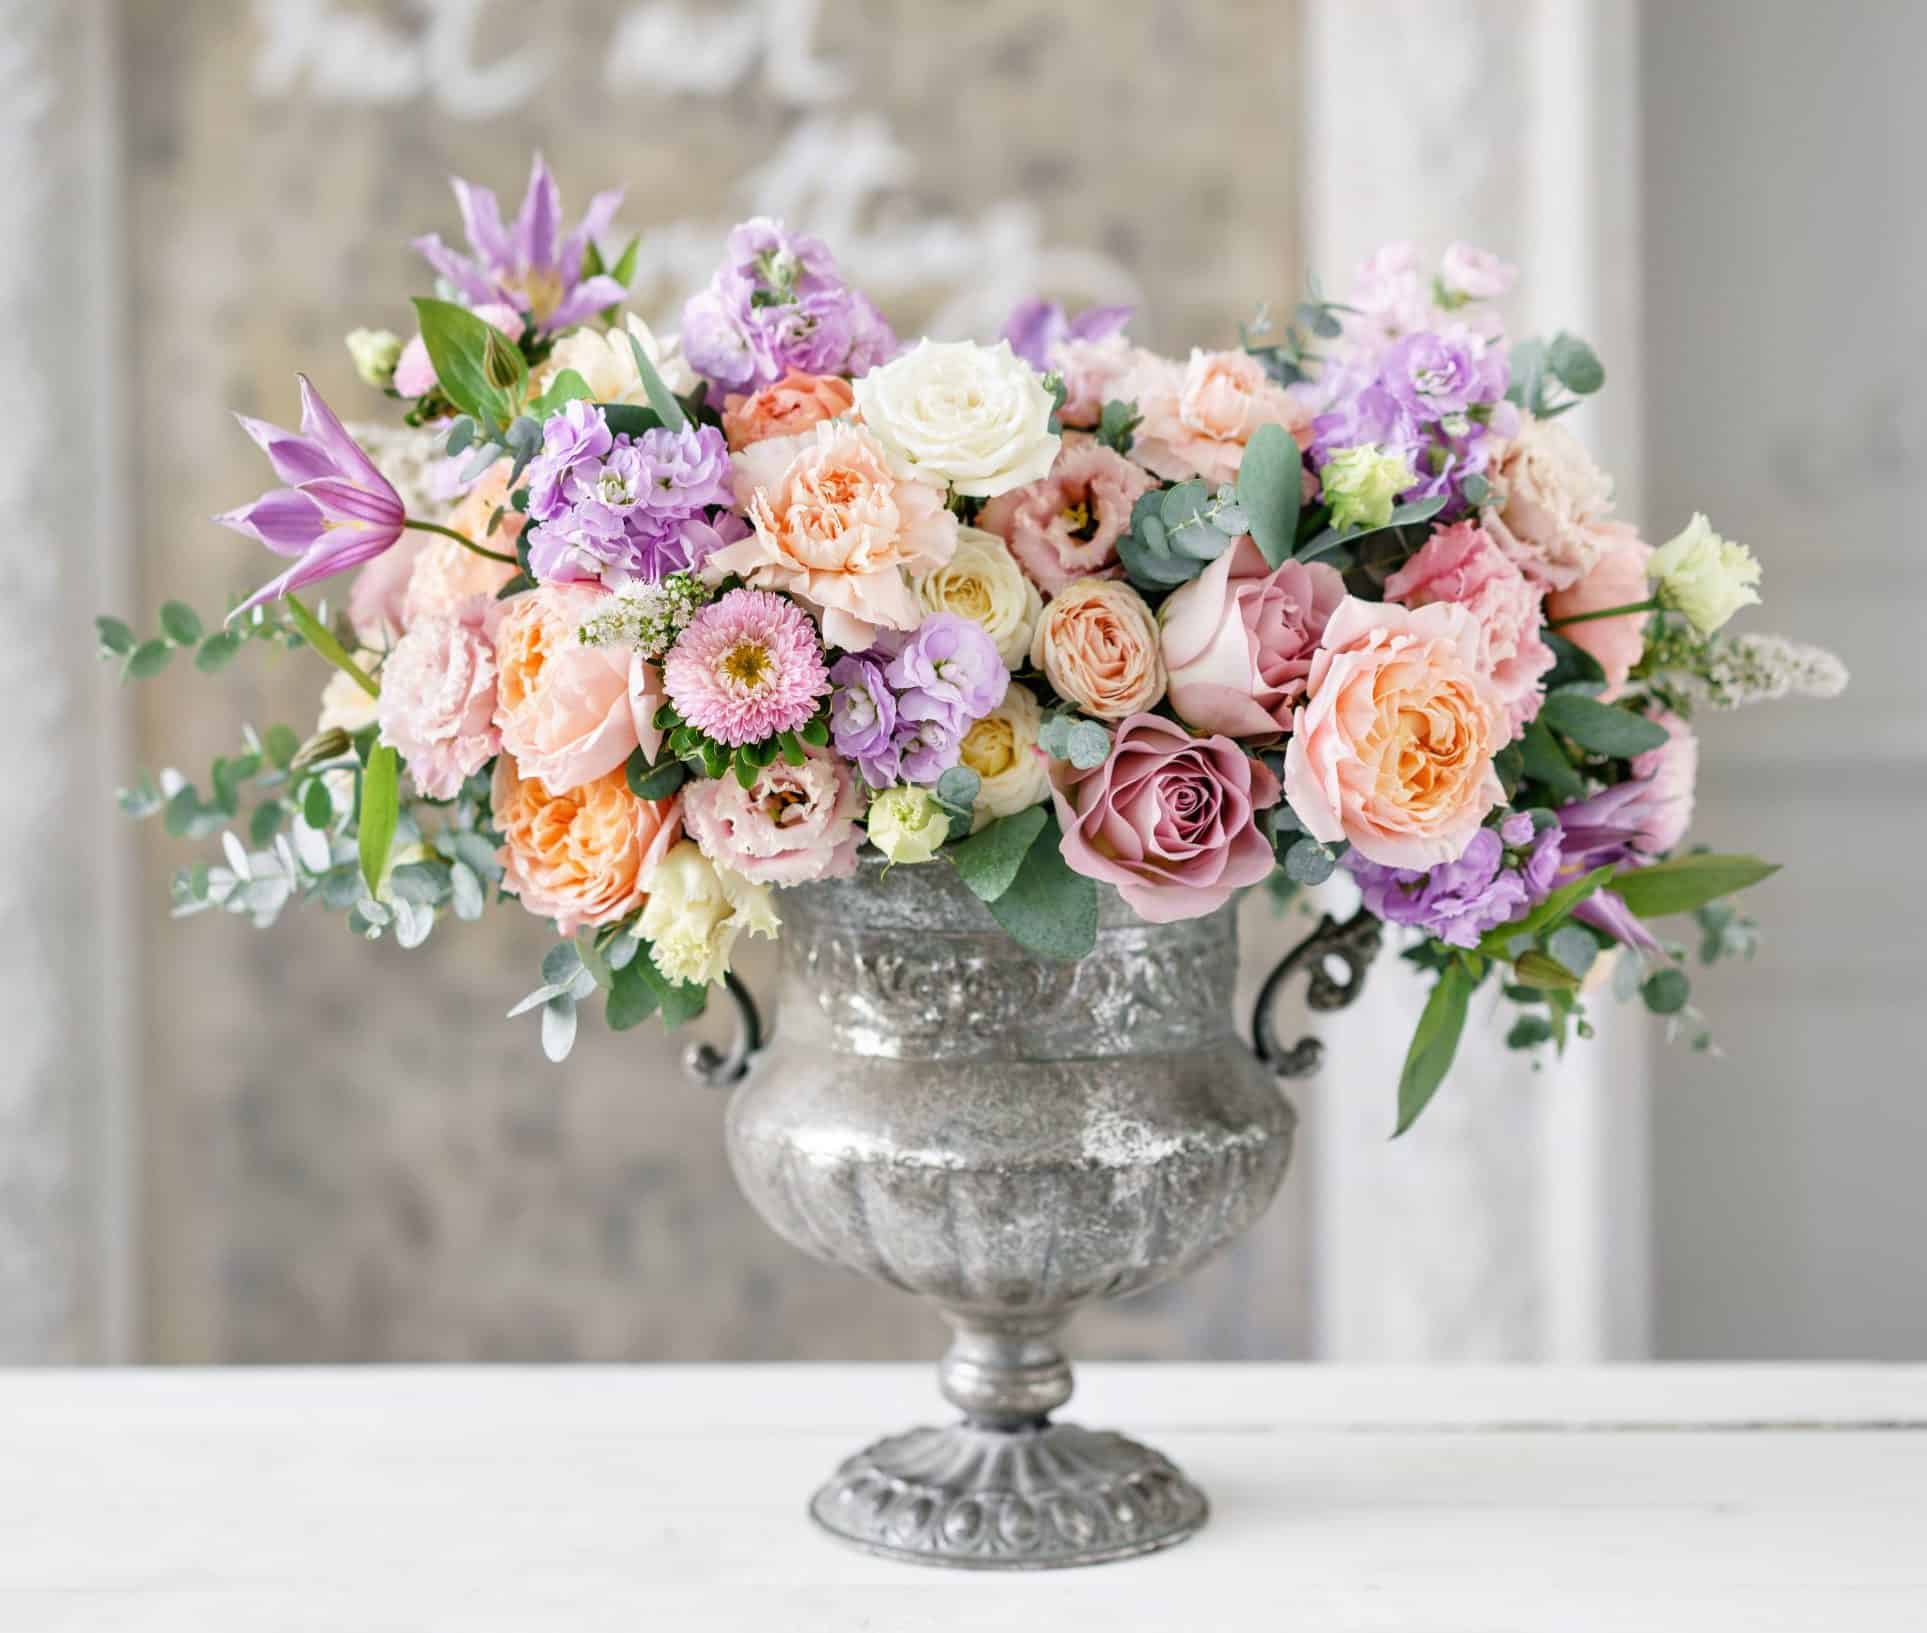 Fall floral arrangements add color texture shape with naturals